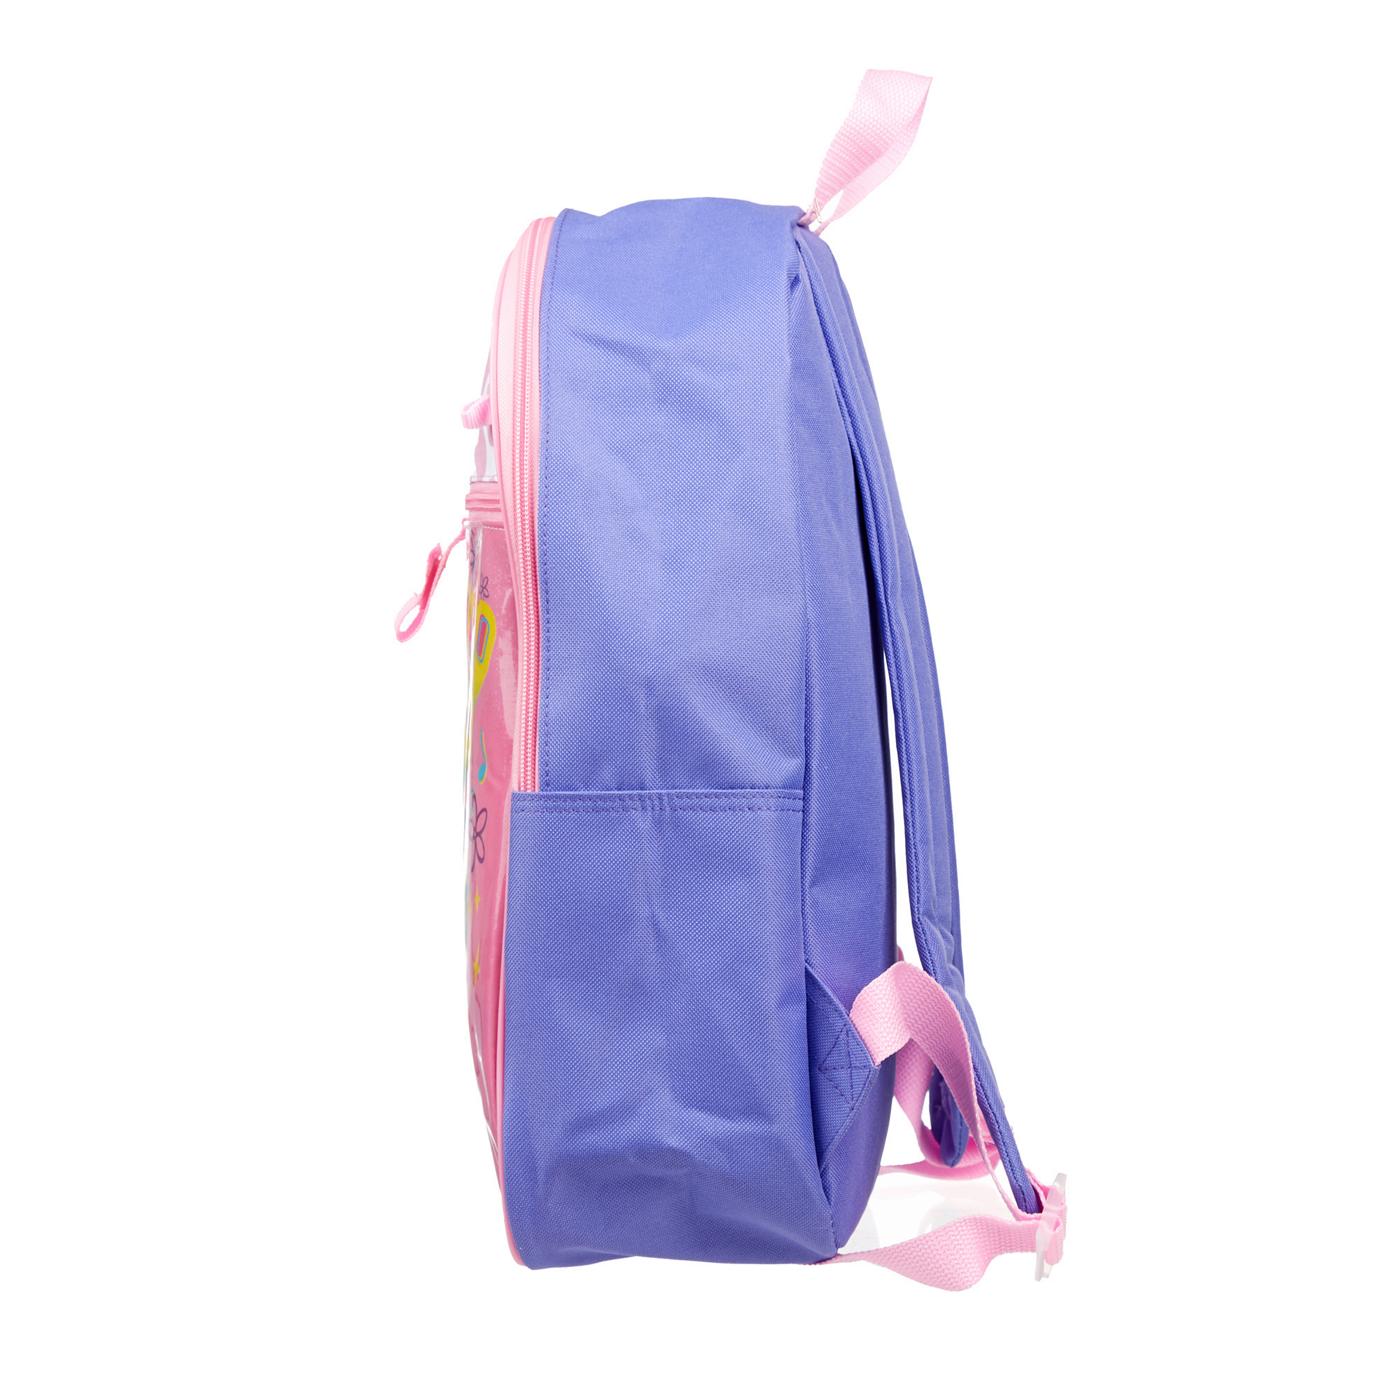 Squishmallows Backpack Set; image 5 of 6